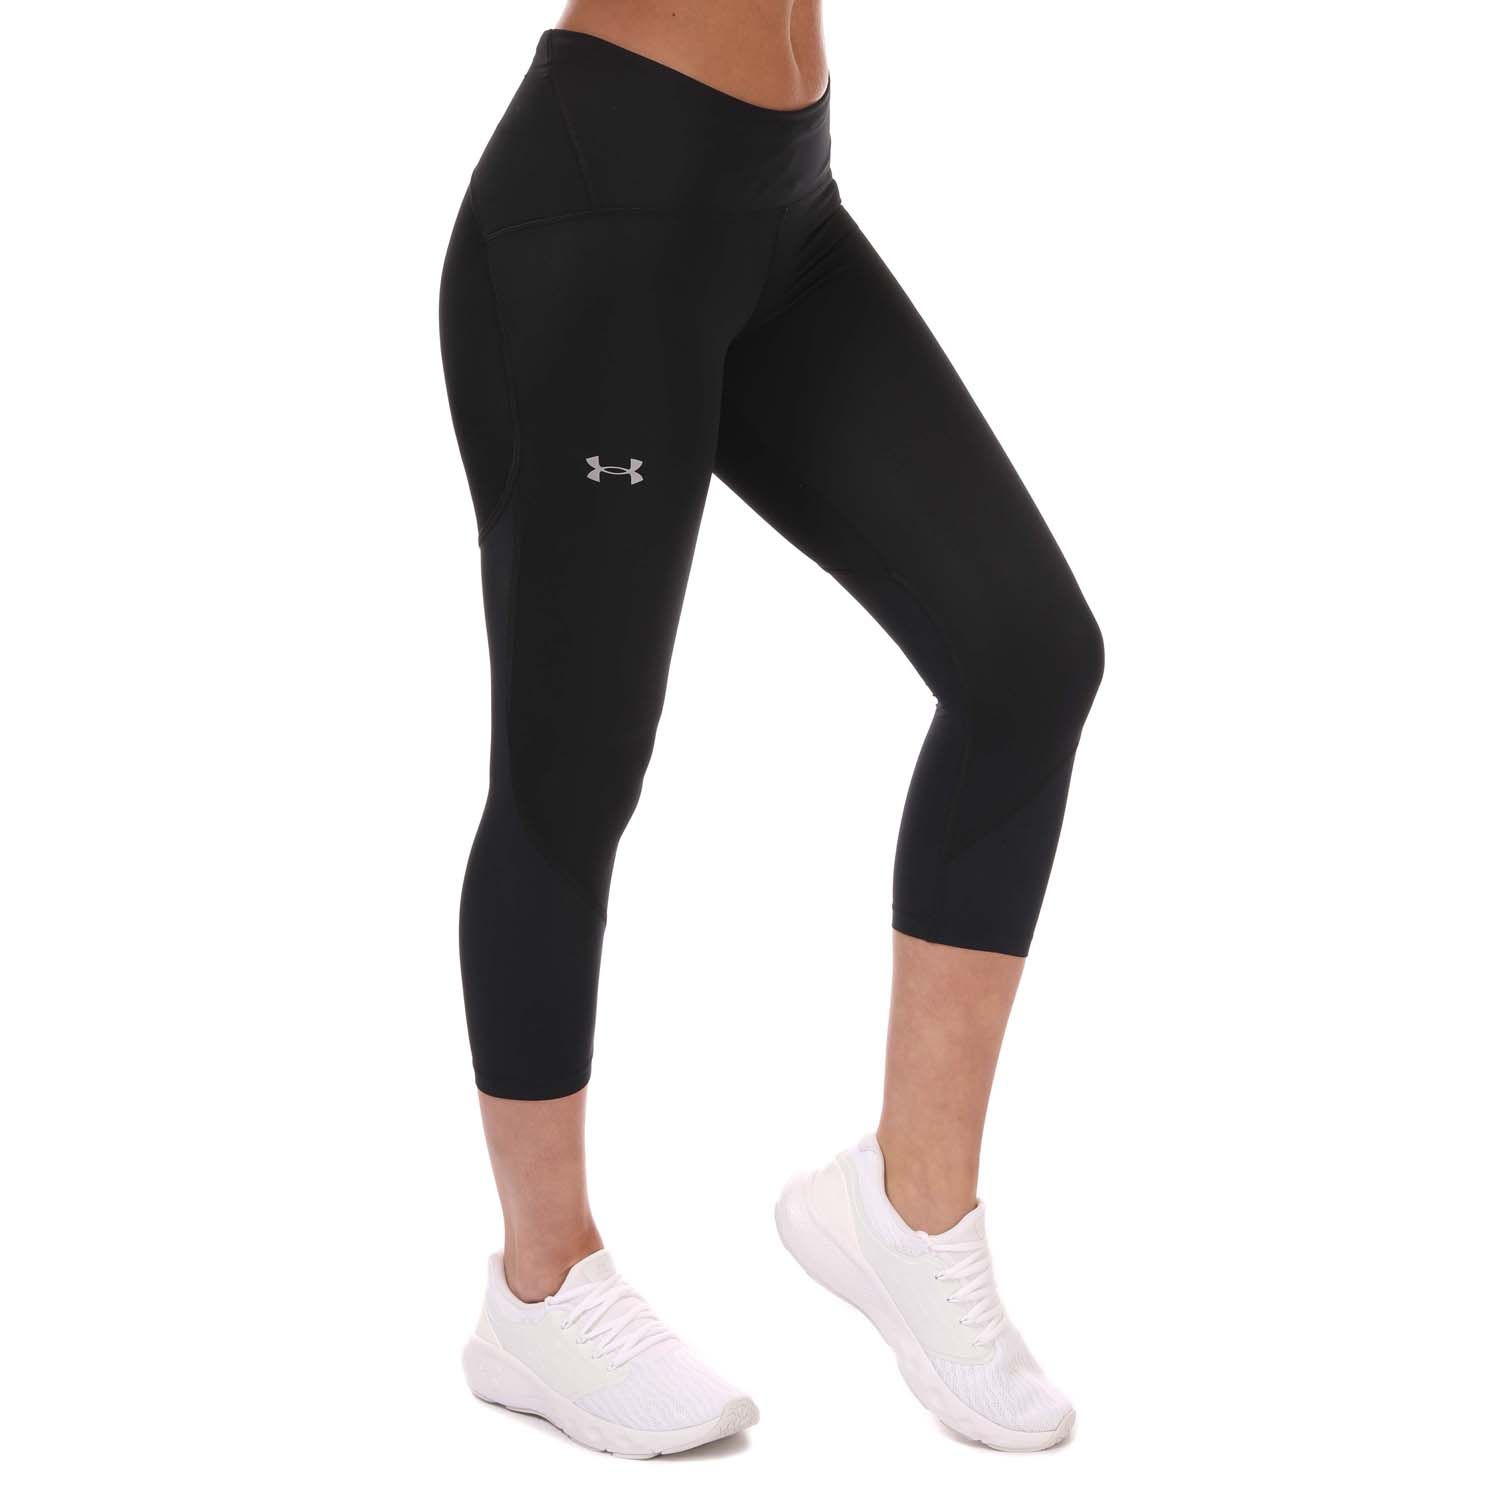 Cropped Under Armor leggings with mesh